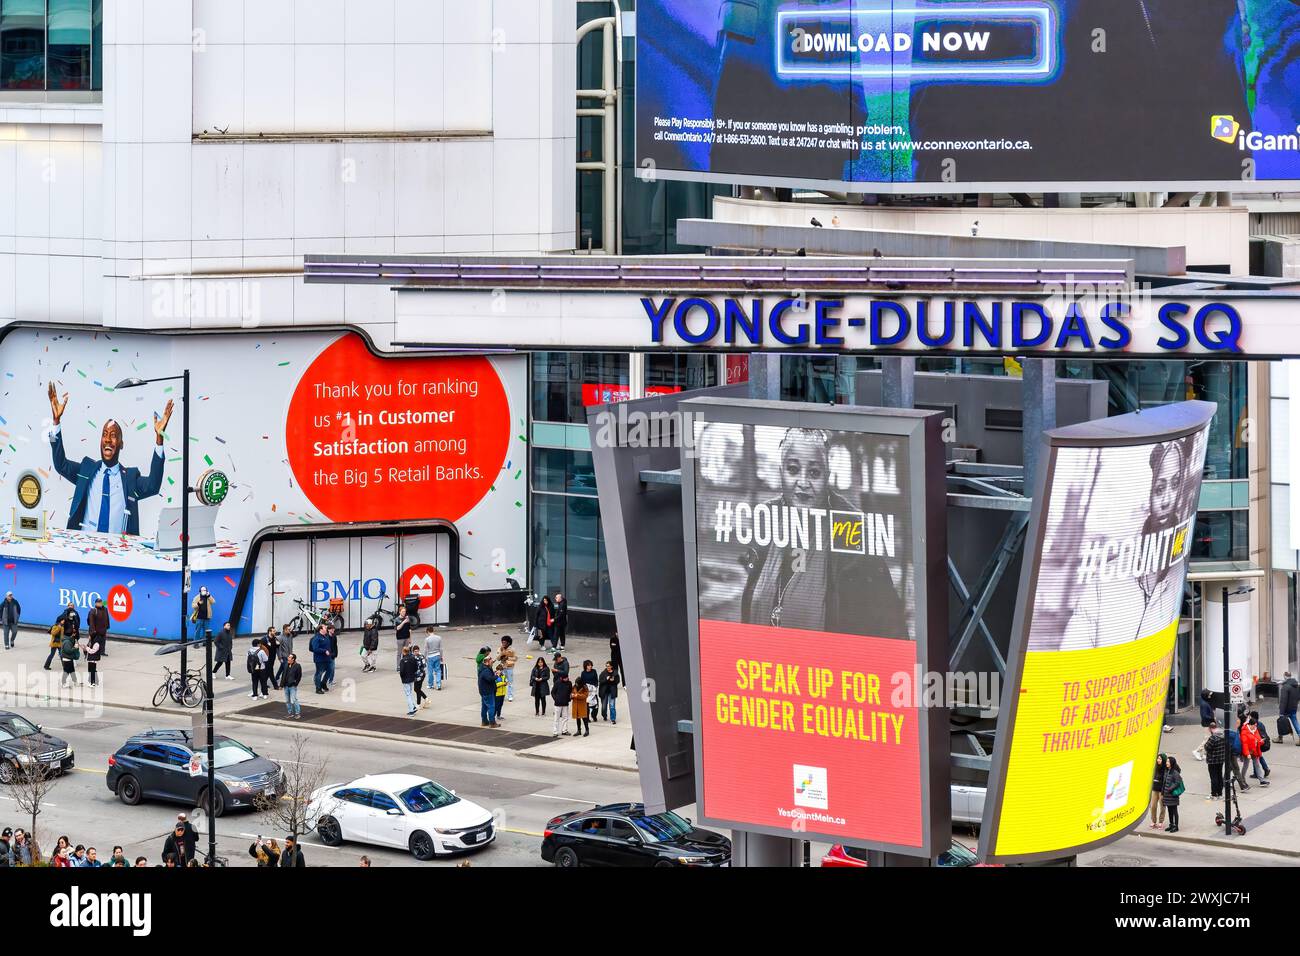 Large-scale advertisement screen in Yonge-Dundas Square, Toronto, Canada Stock Photo